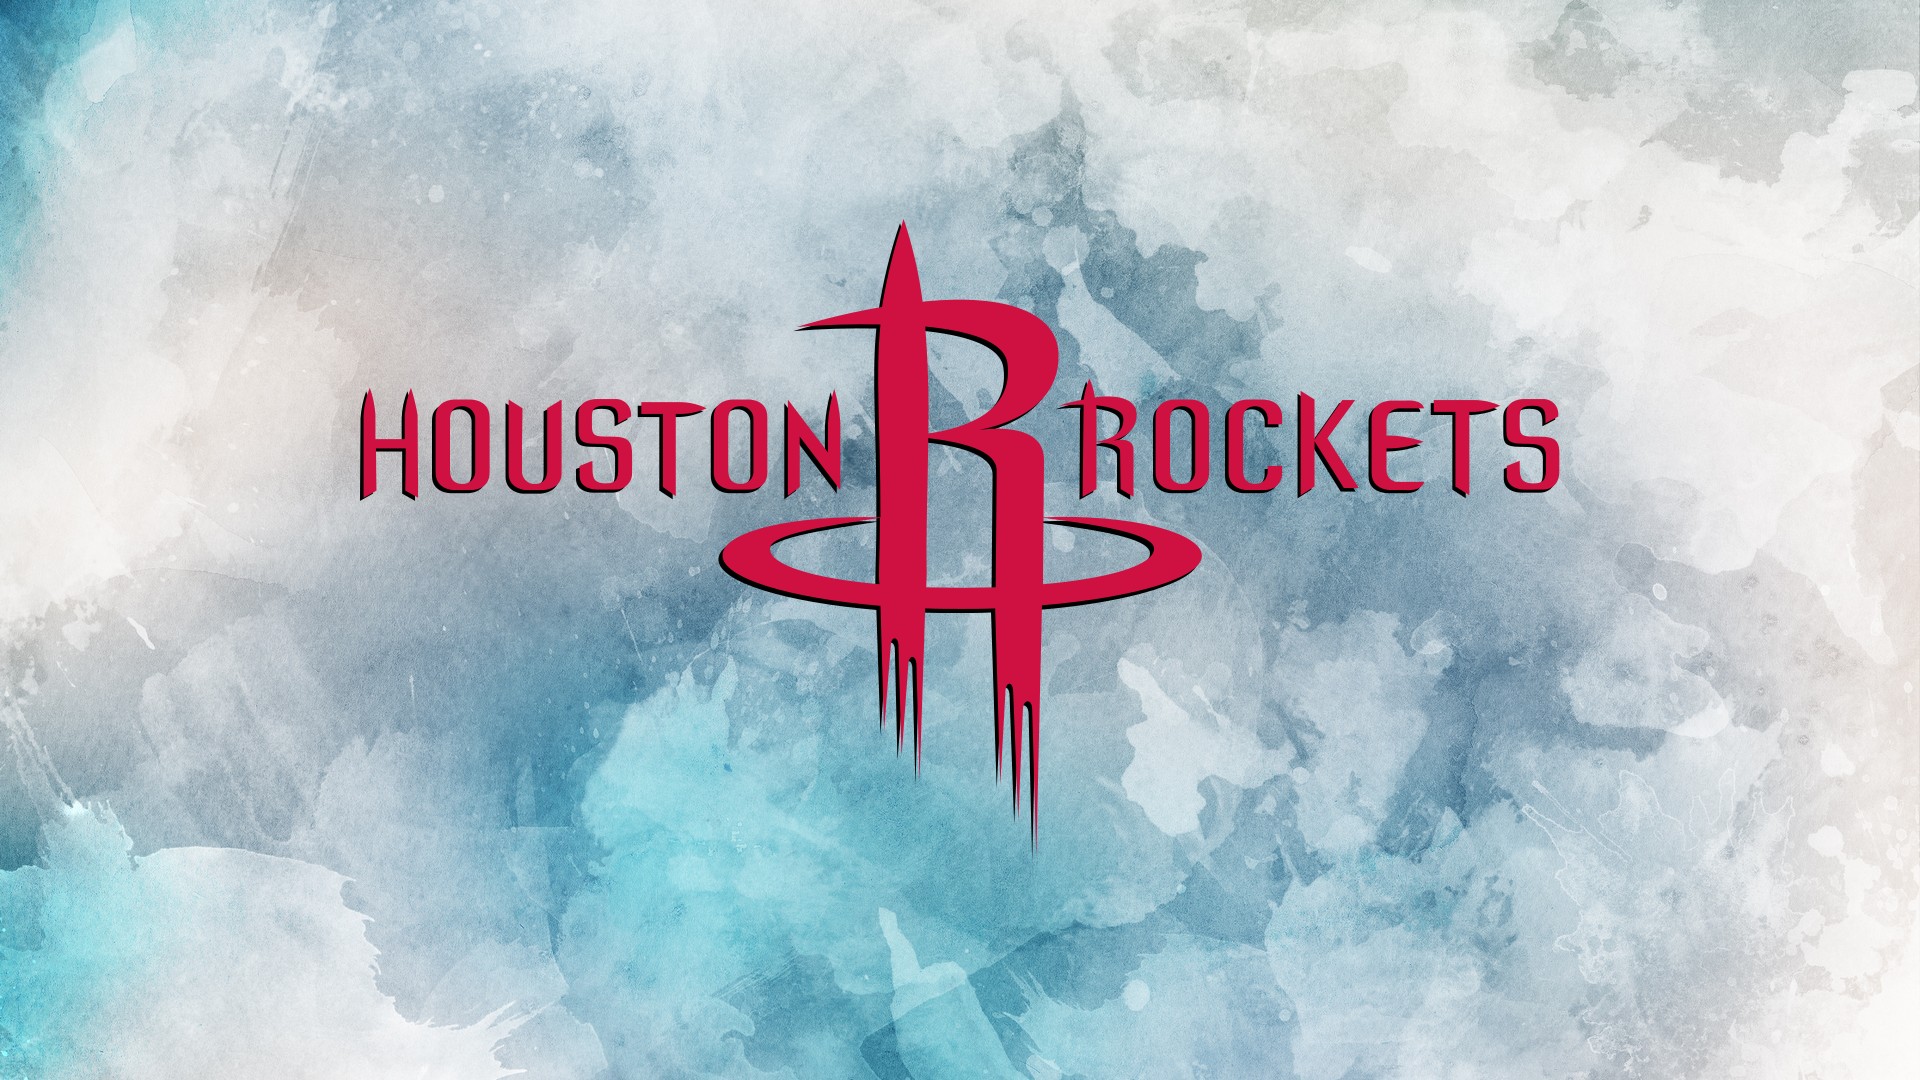 HD Backgrounds Houston Basketball with image dimensions 1920x1080 pixel. You can make this wallpaper for your Desktop Computer Backgrounds, Windows or Mac Screensavers, iPhone Lock screen, Tablet or Android and another Mobile Phone device